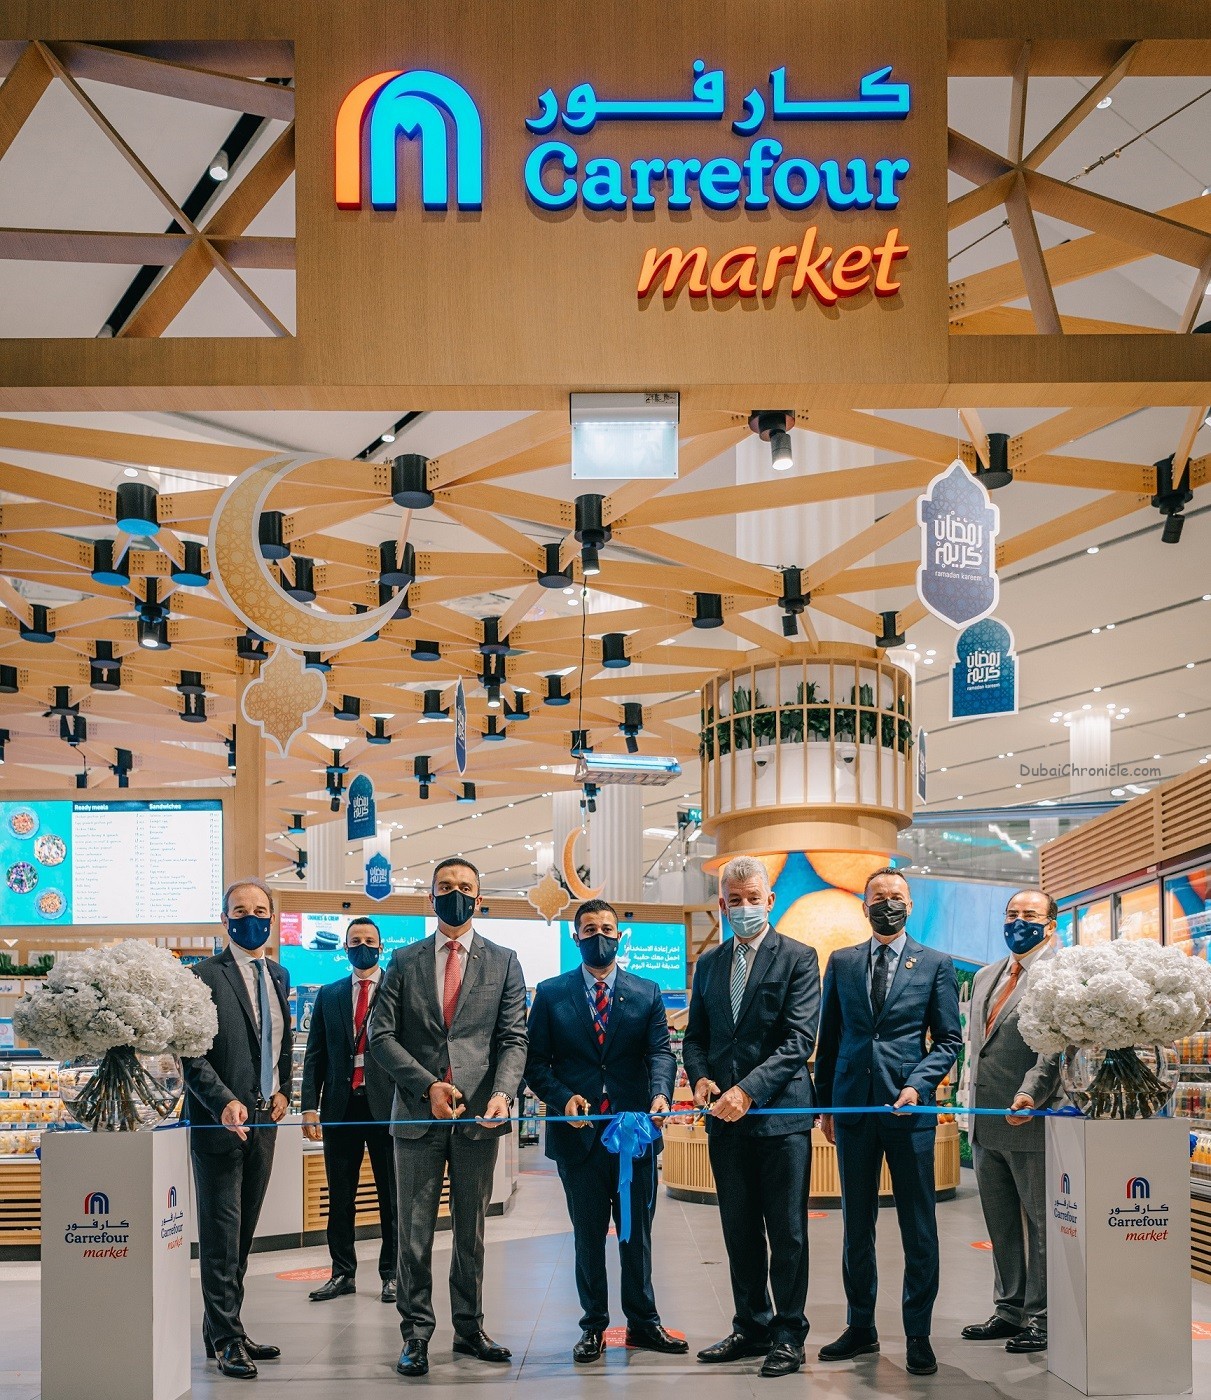 Carrefour – owned and operated by Majid Al Futtaim in the UAE – has opened a new store at the world’s busiest international airport, DXB.